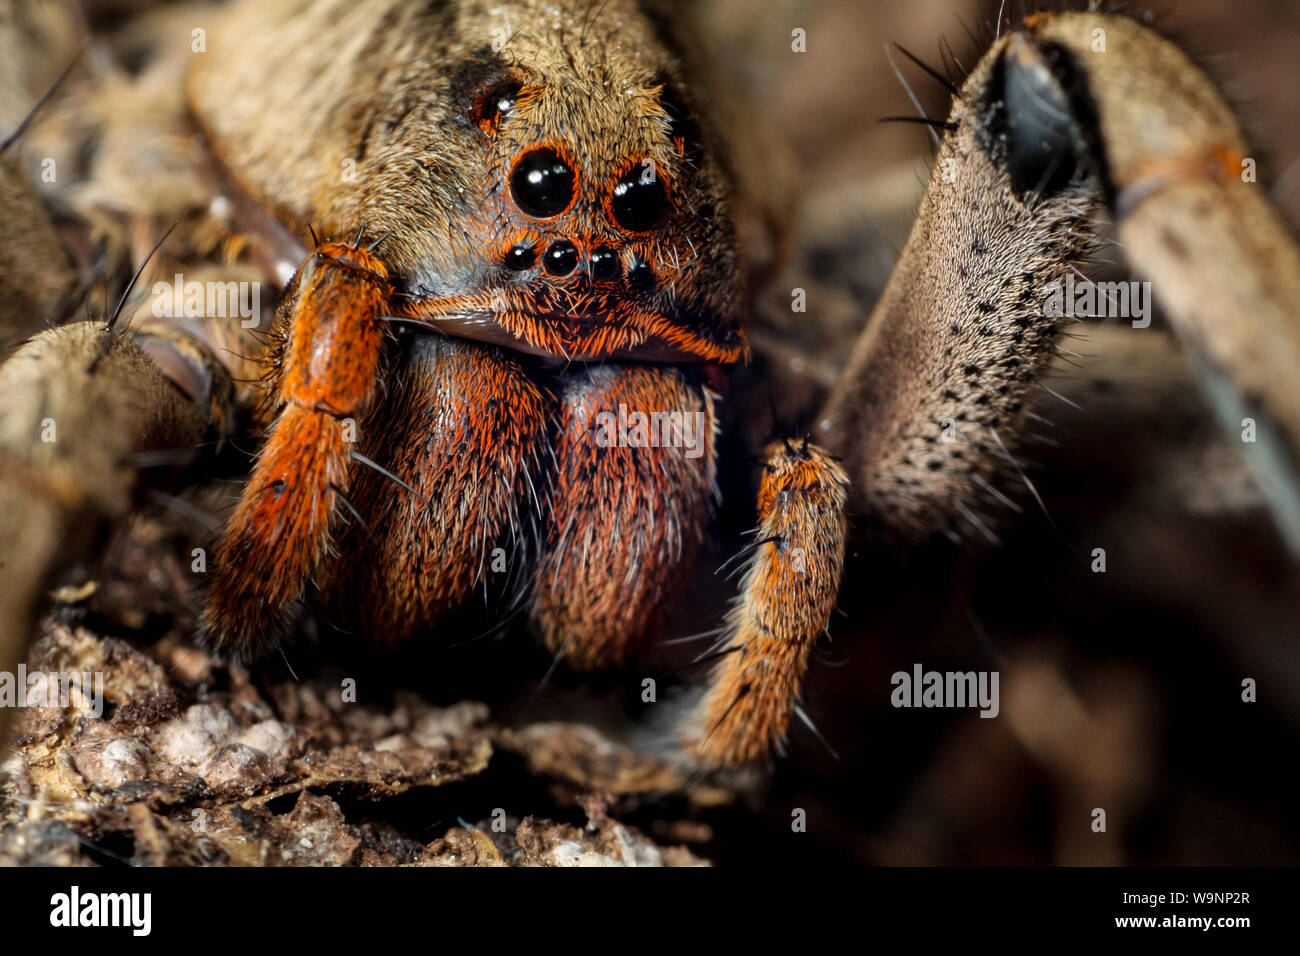 Close-up of a wolf spider (Lycosidae, Lycosa erythrognatha) common in gardens, arachnid eyes in detail Stock Photo